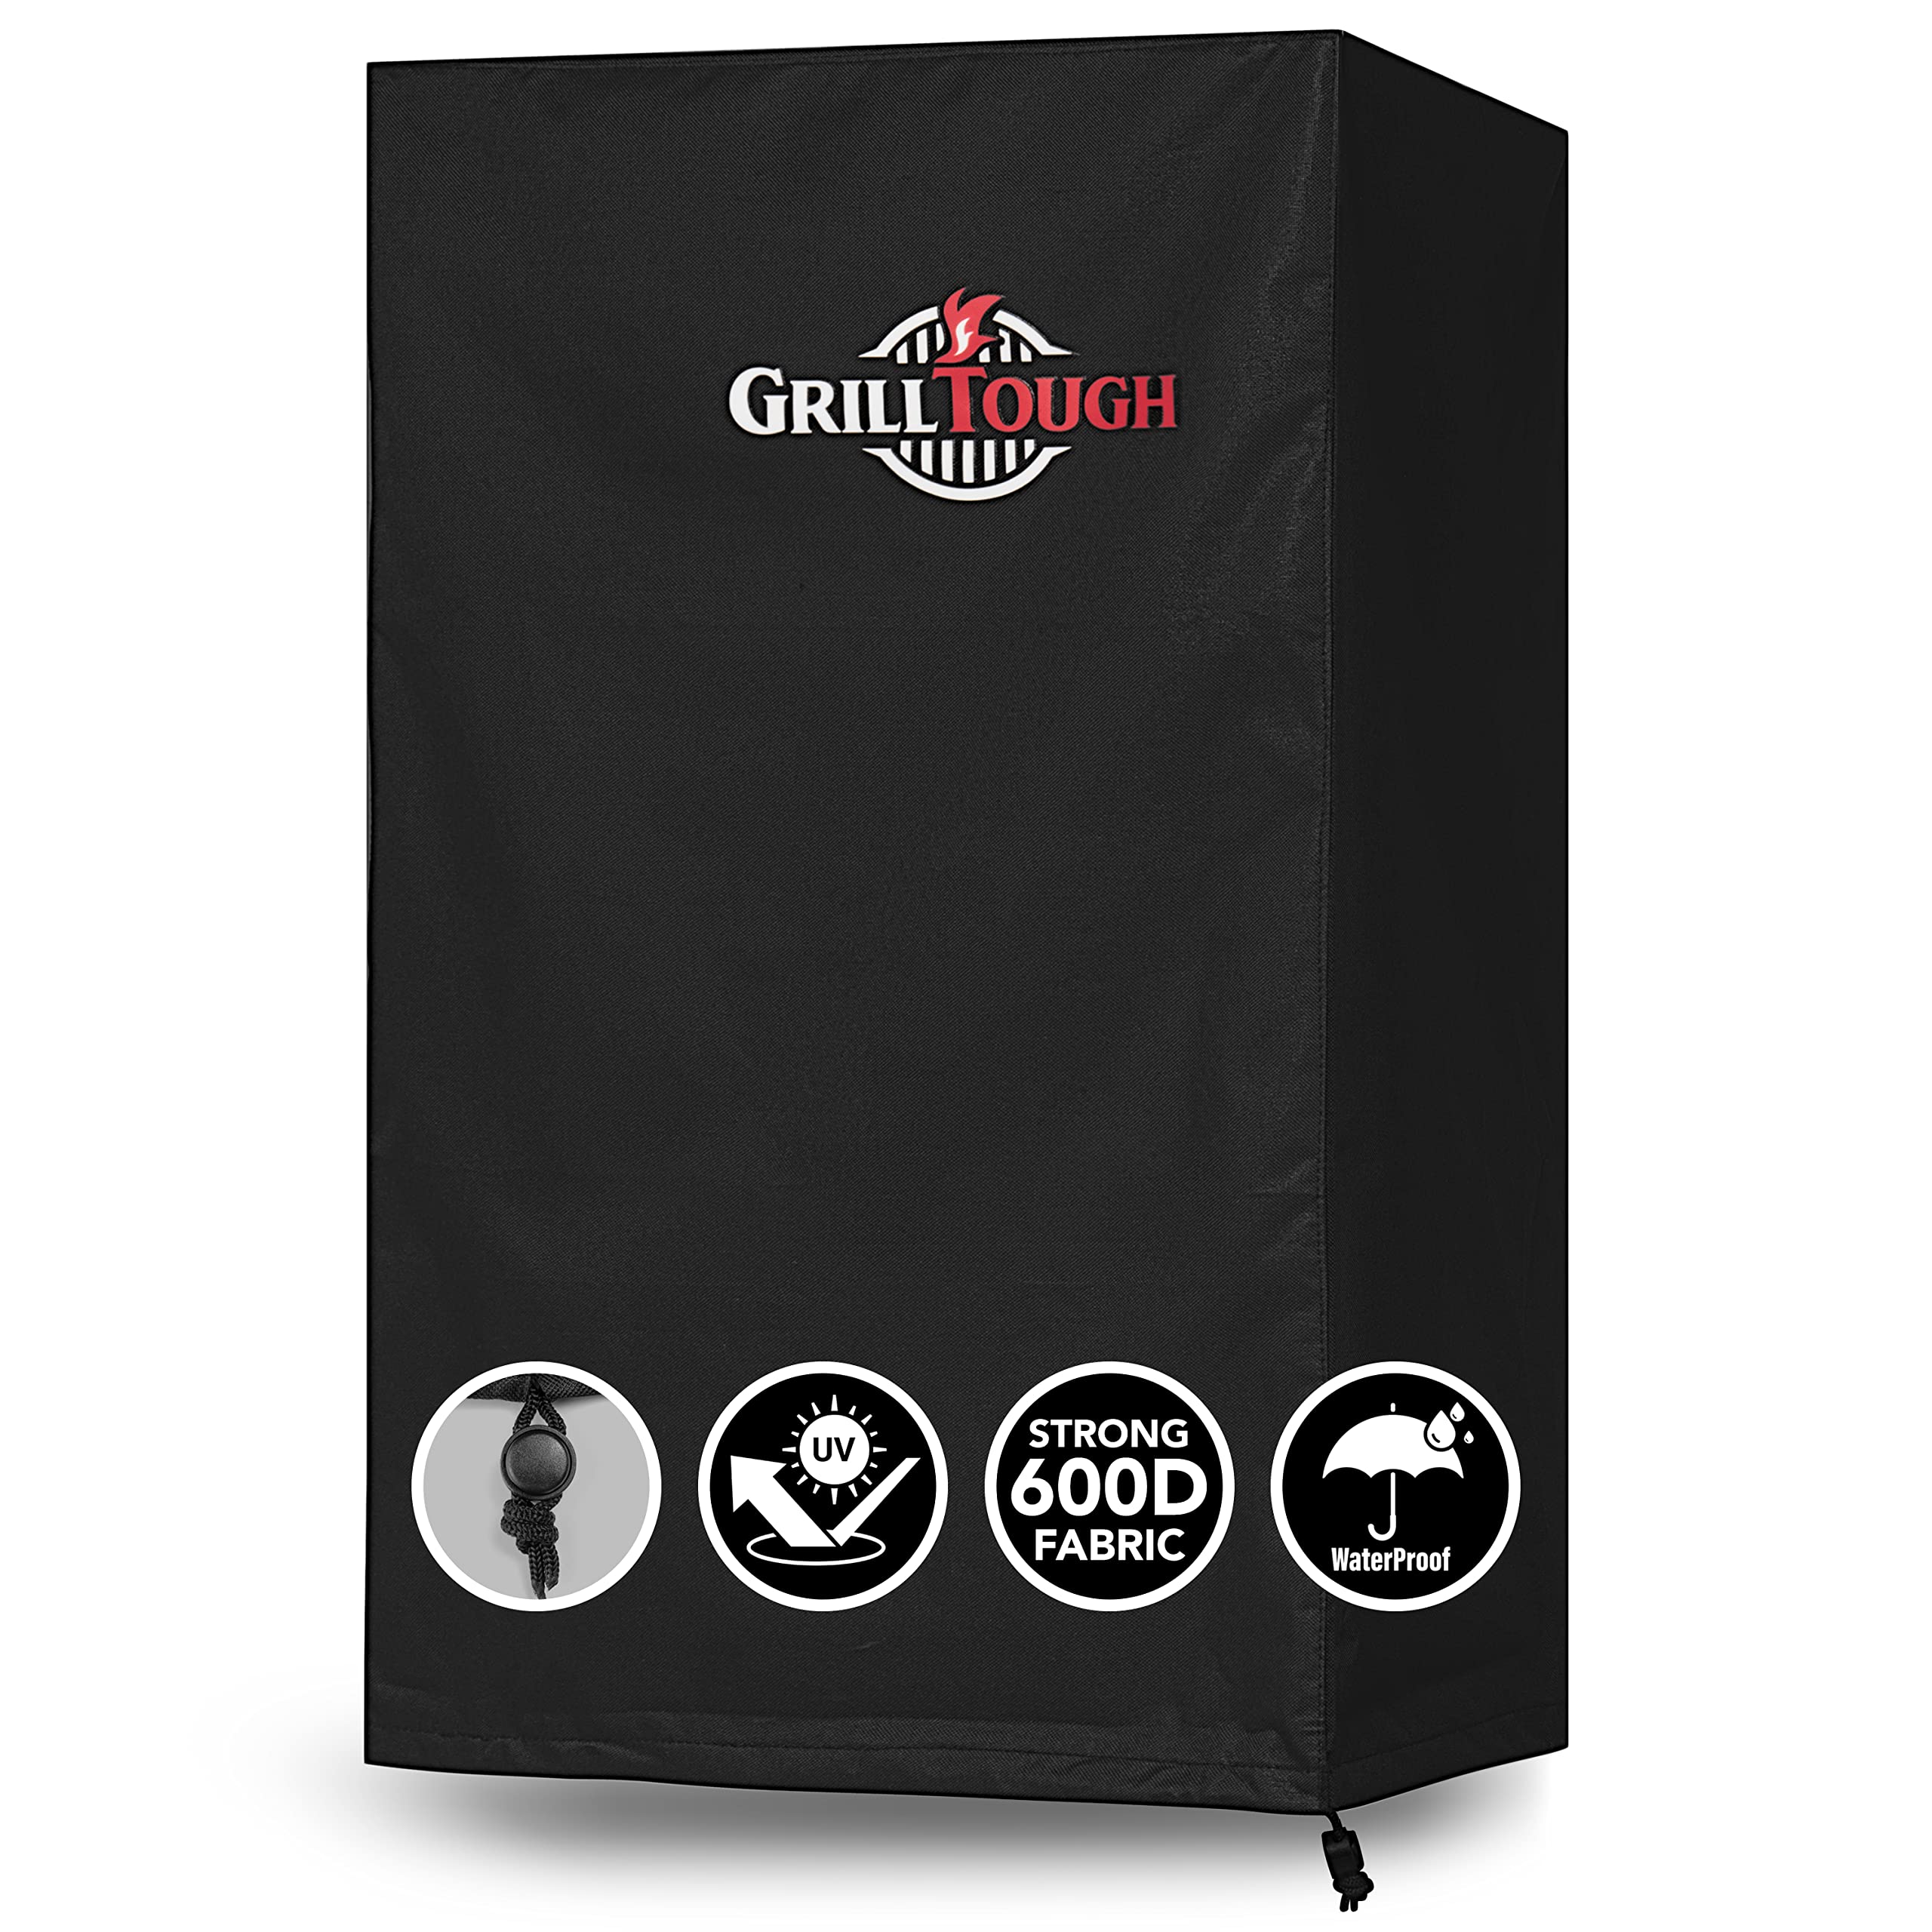 GrillTough Heavy Duty BBQ Grill Cover for Outdoor Grill – Waterproof, Weather Resistant, UV & Fade Resistant with Adjustable Straps – Gas Grill Cover for Weber, Genesis, Charbroil, etc.  - Like New